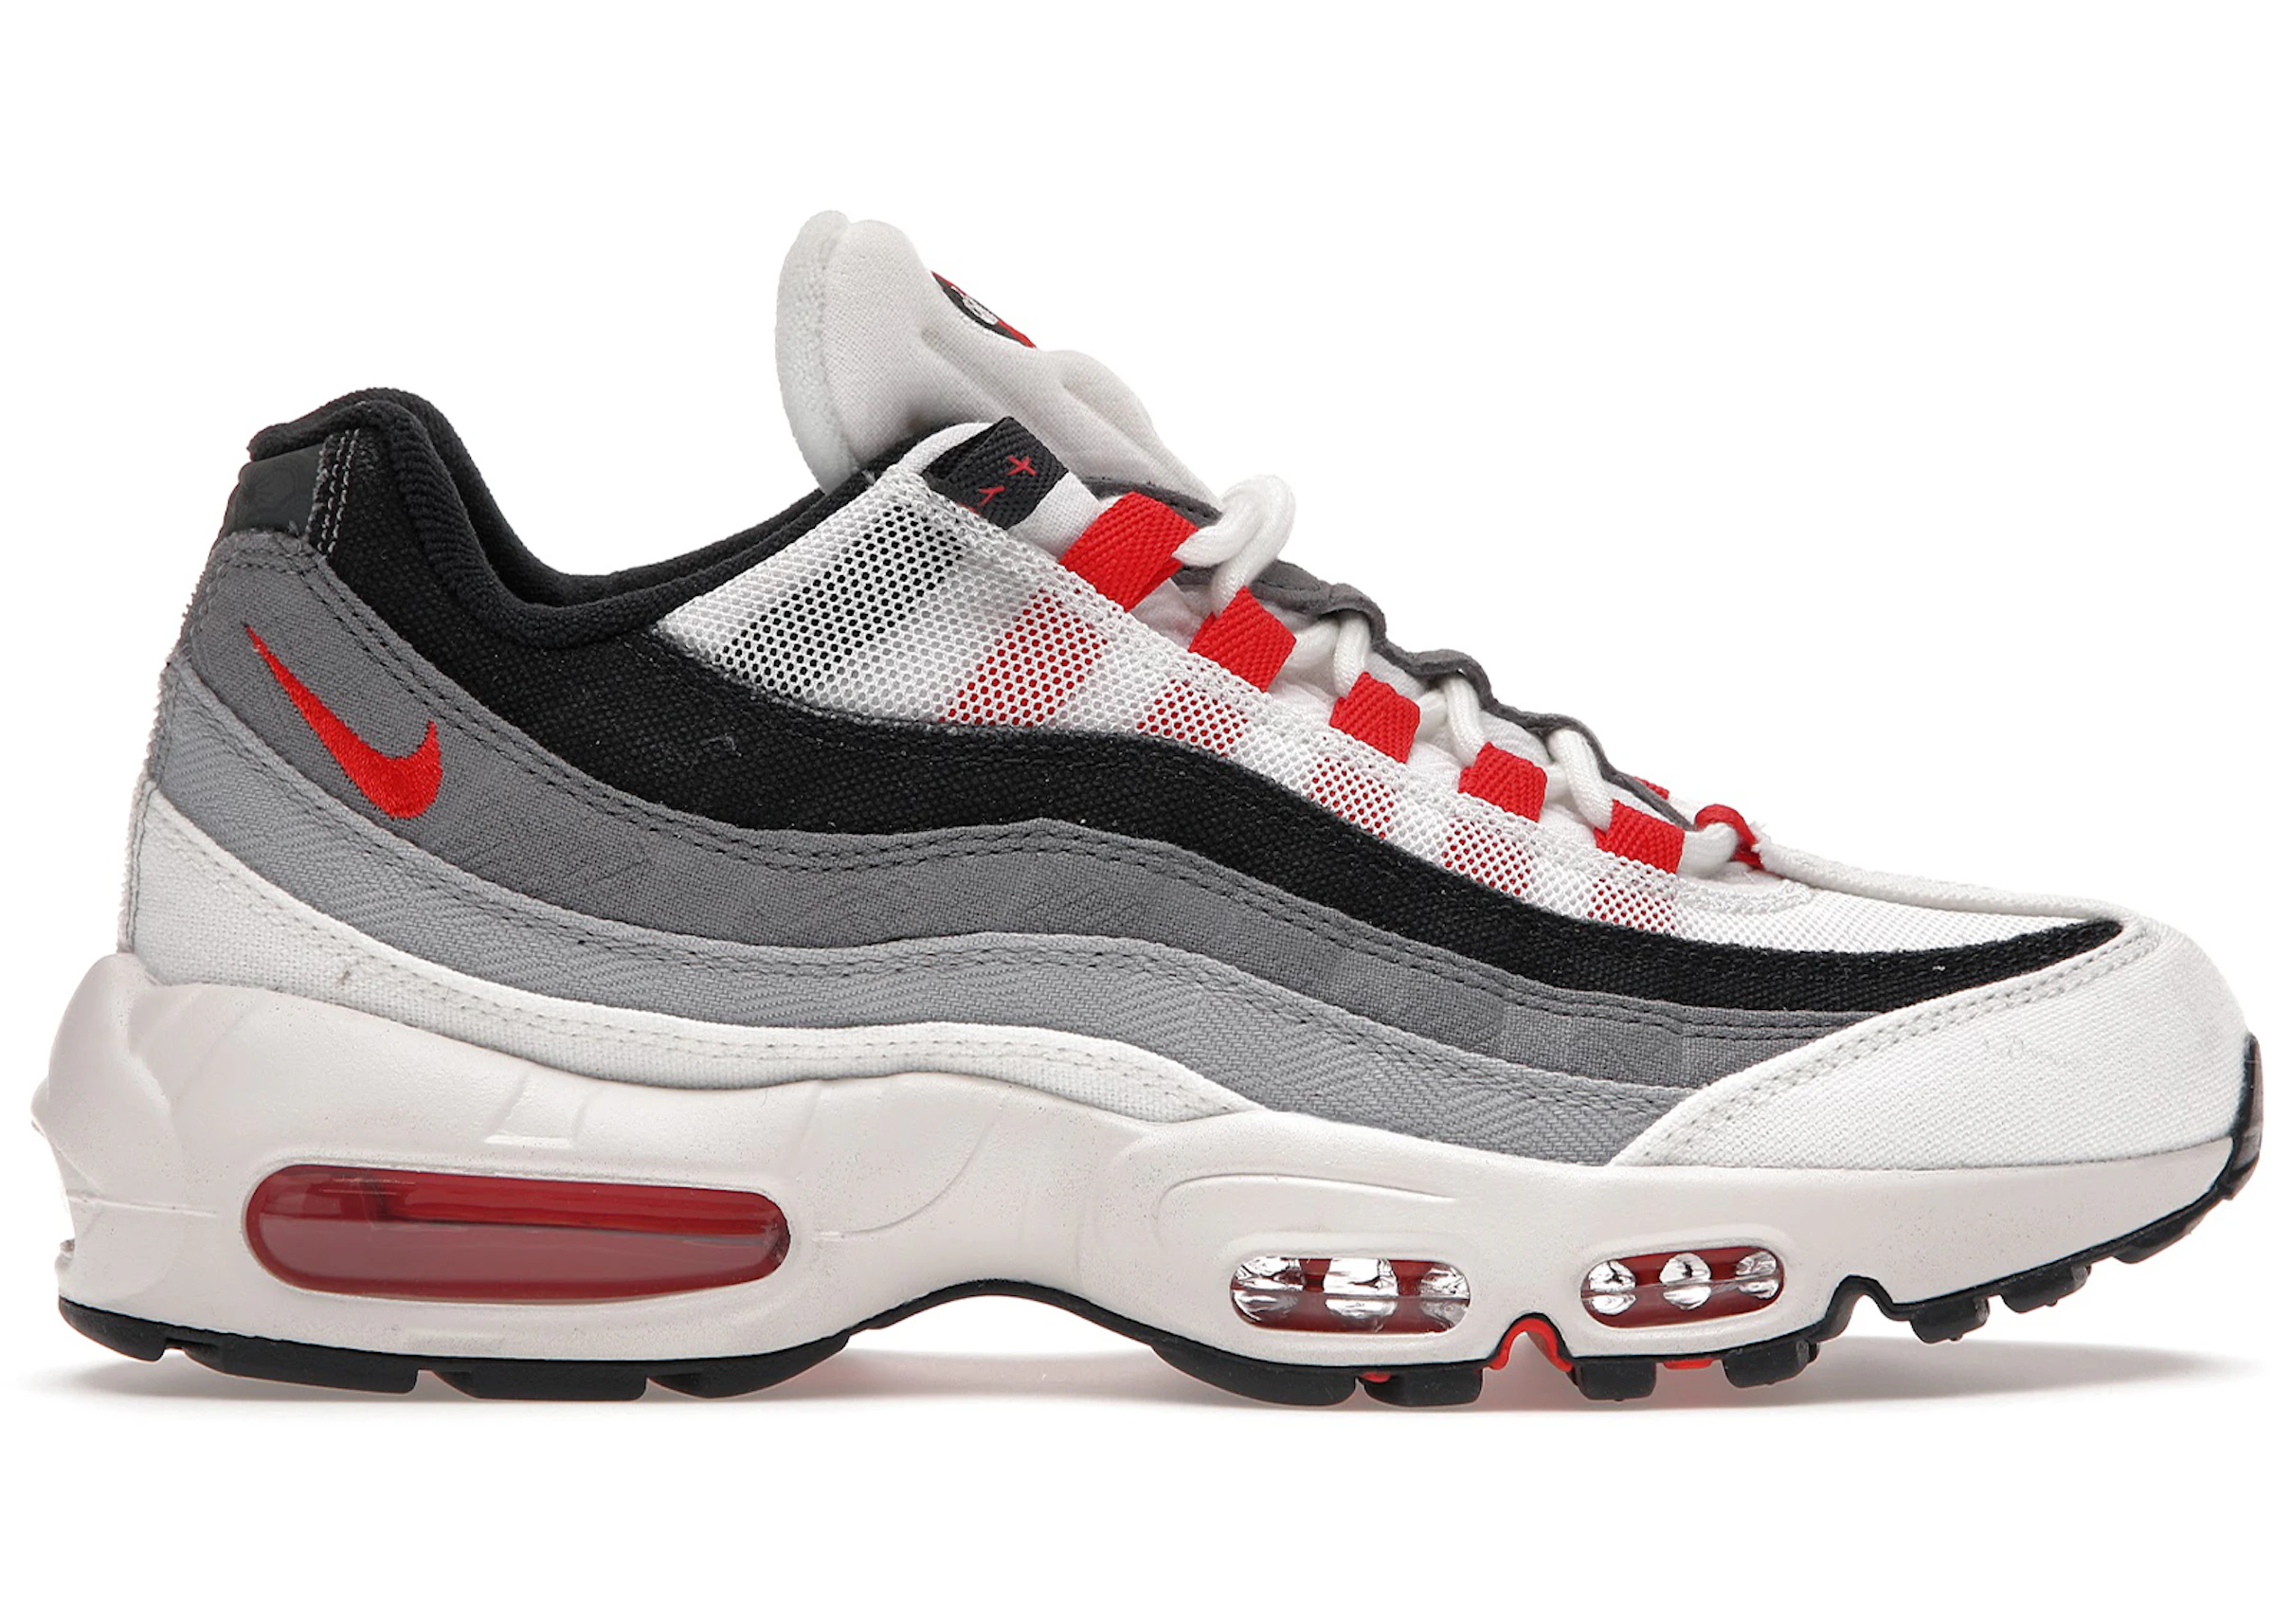 Supposed to Powerful Quickly Nike Air Max 95 Smoke Grey - DH9792-100 - US